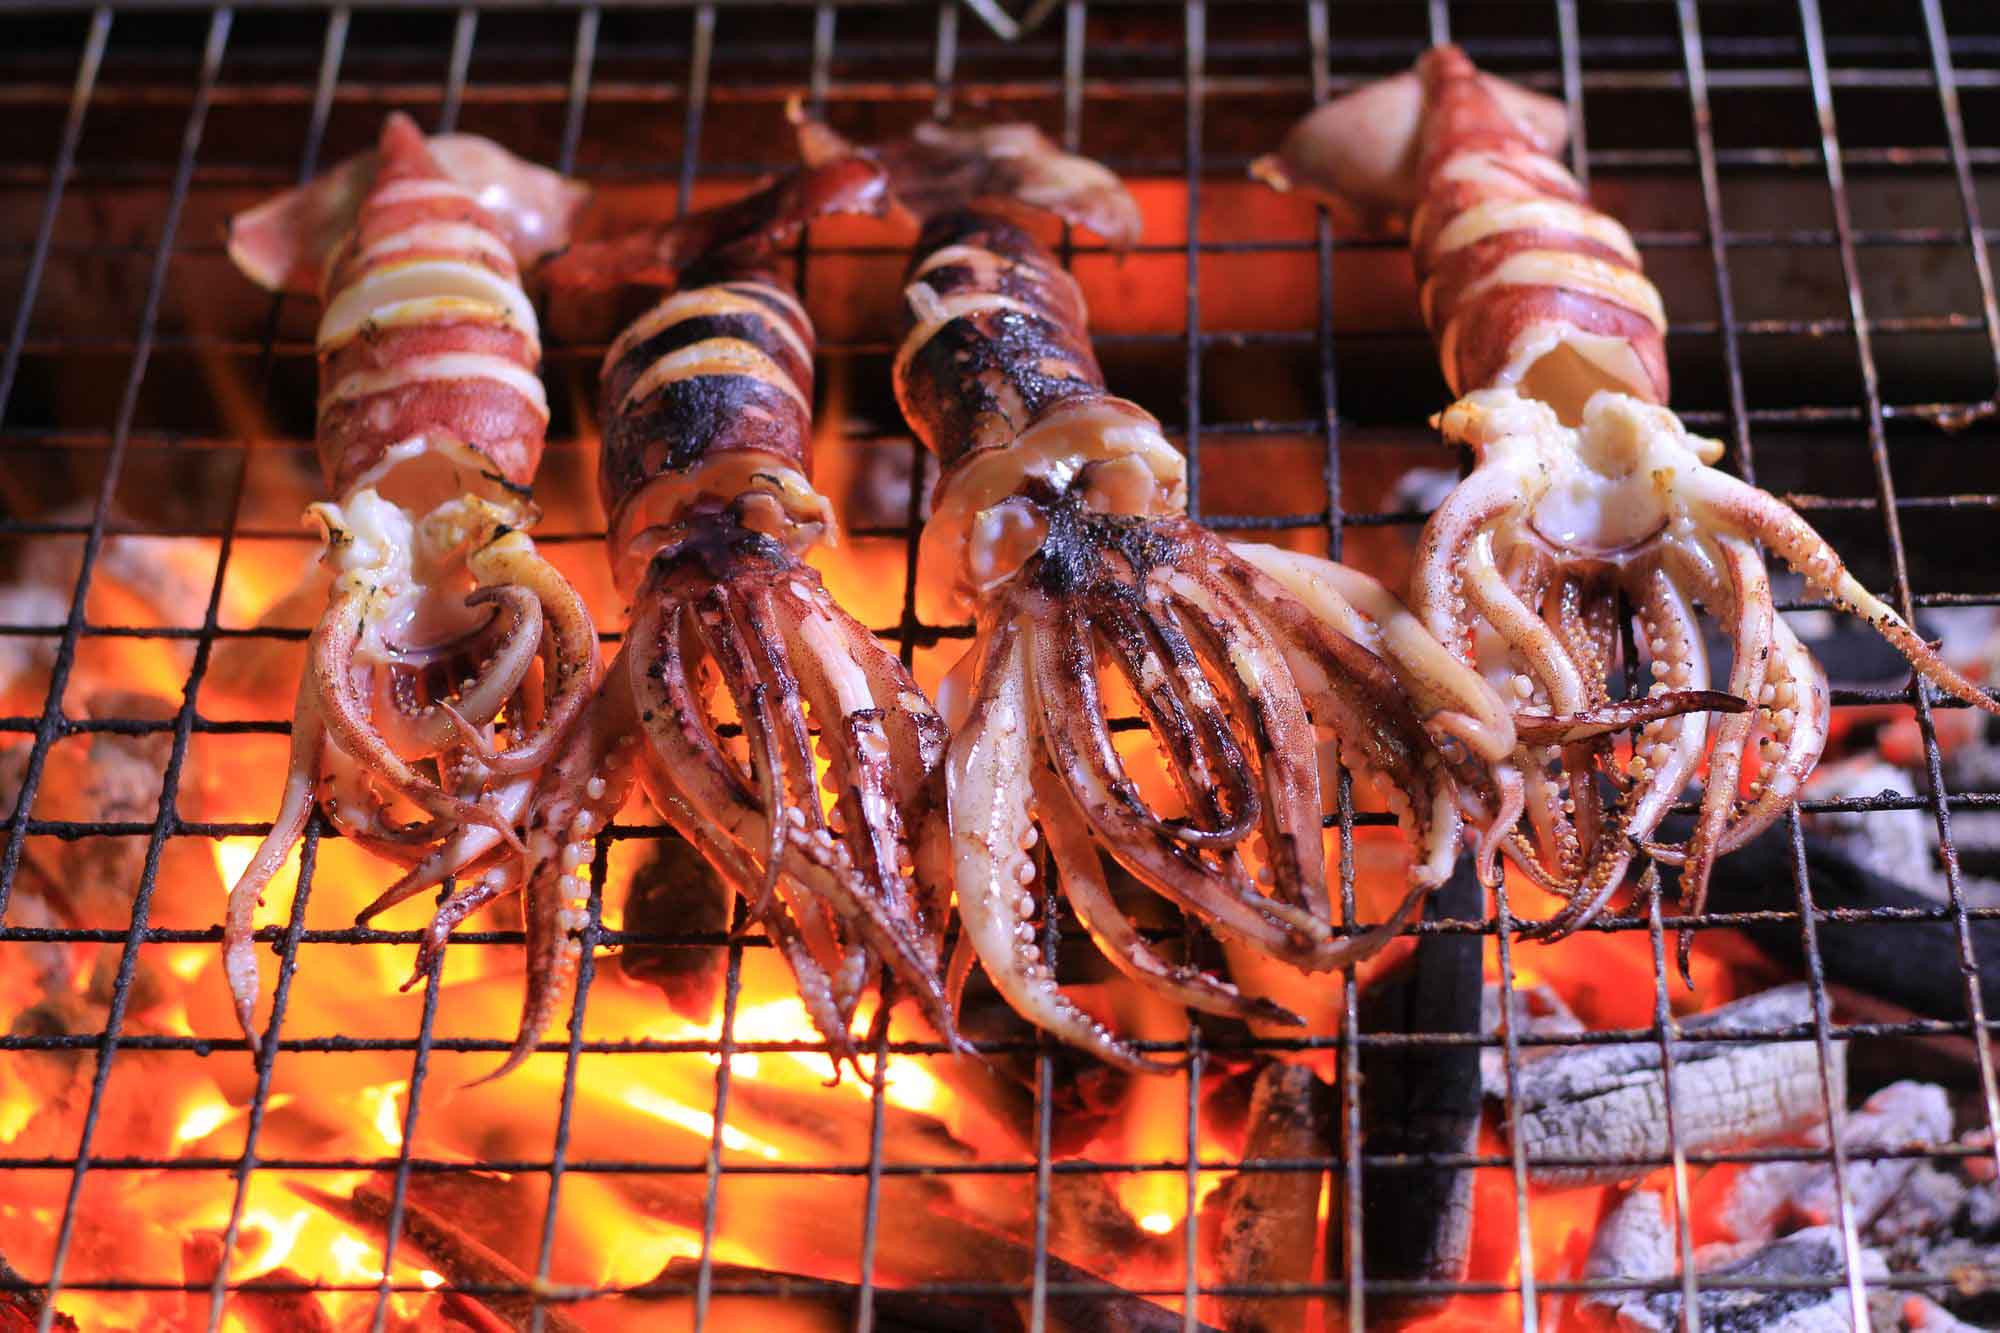 Squid cooking on top of a Welded Wire Mesh grill grate.